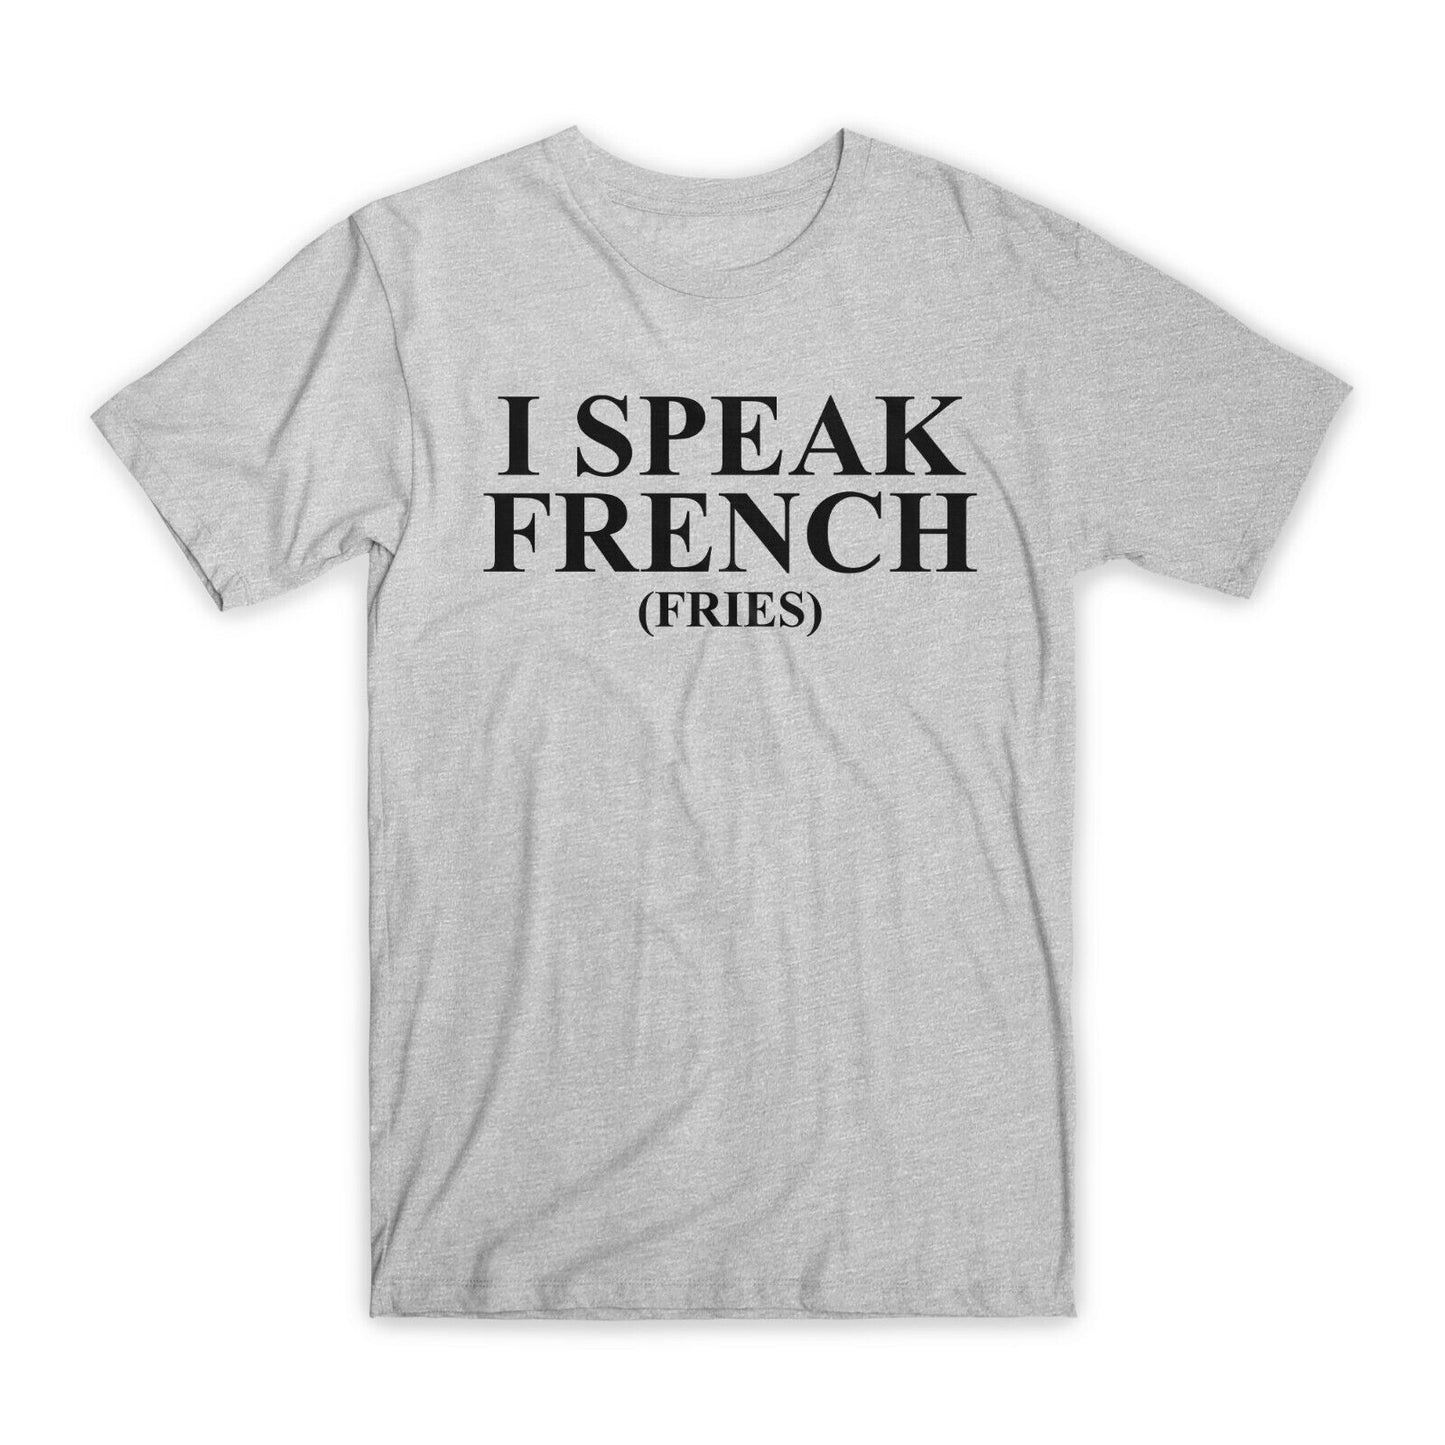 I Speak French Fries T-Shirt Premium Soft Cotton Crew Neck Funny Tees Gifts NEW